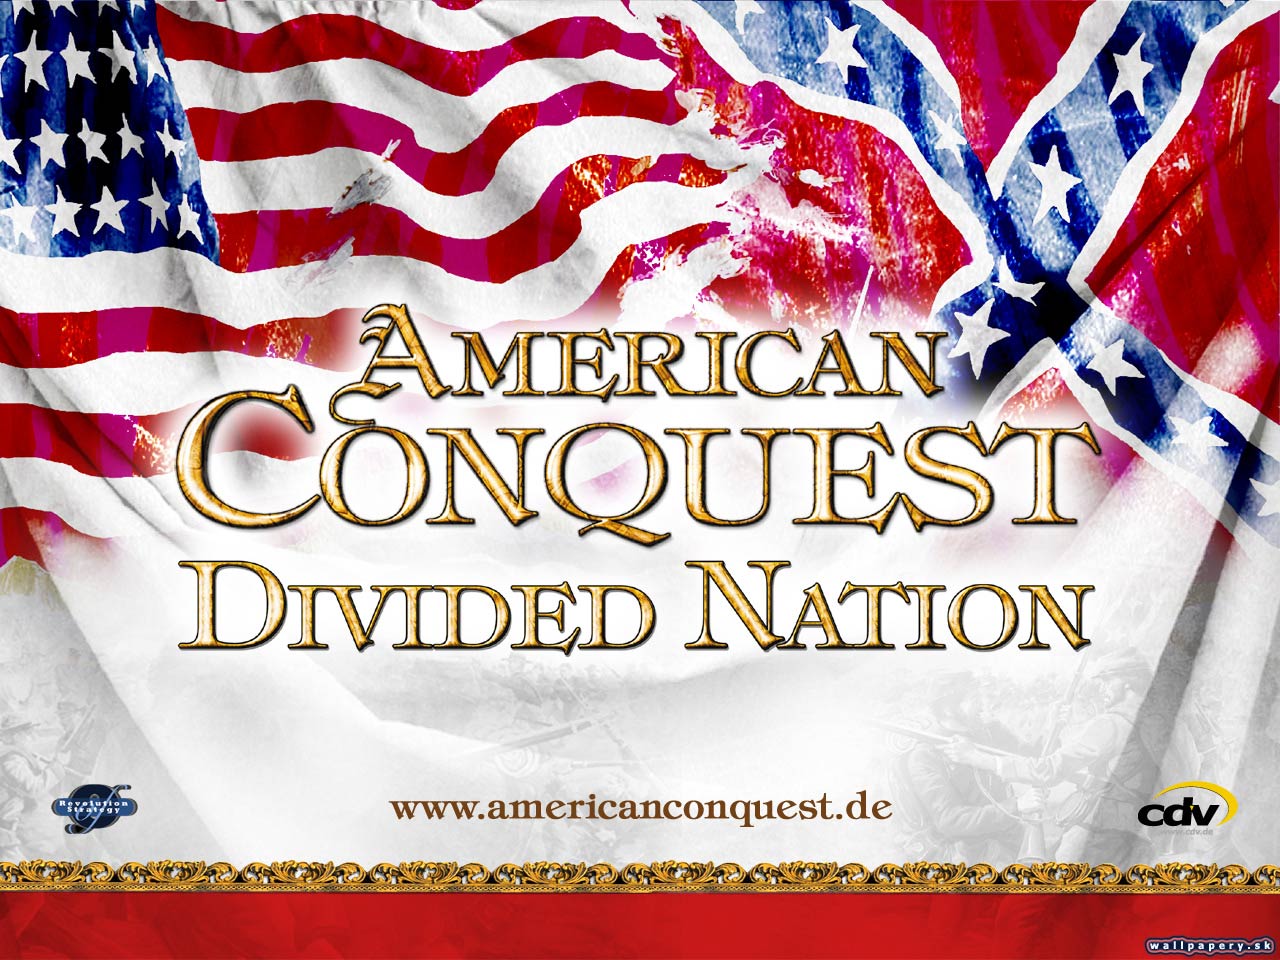 American Conquest: Divided Nation - wallpaper 1